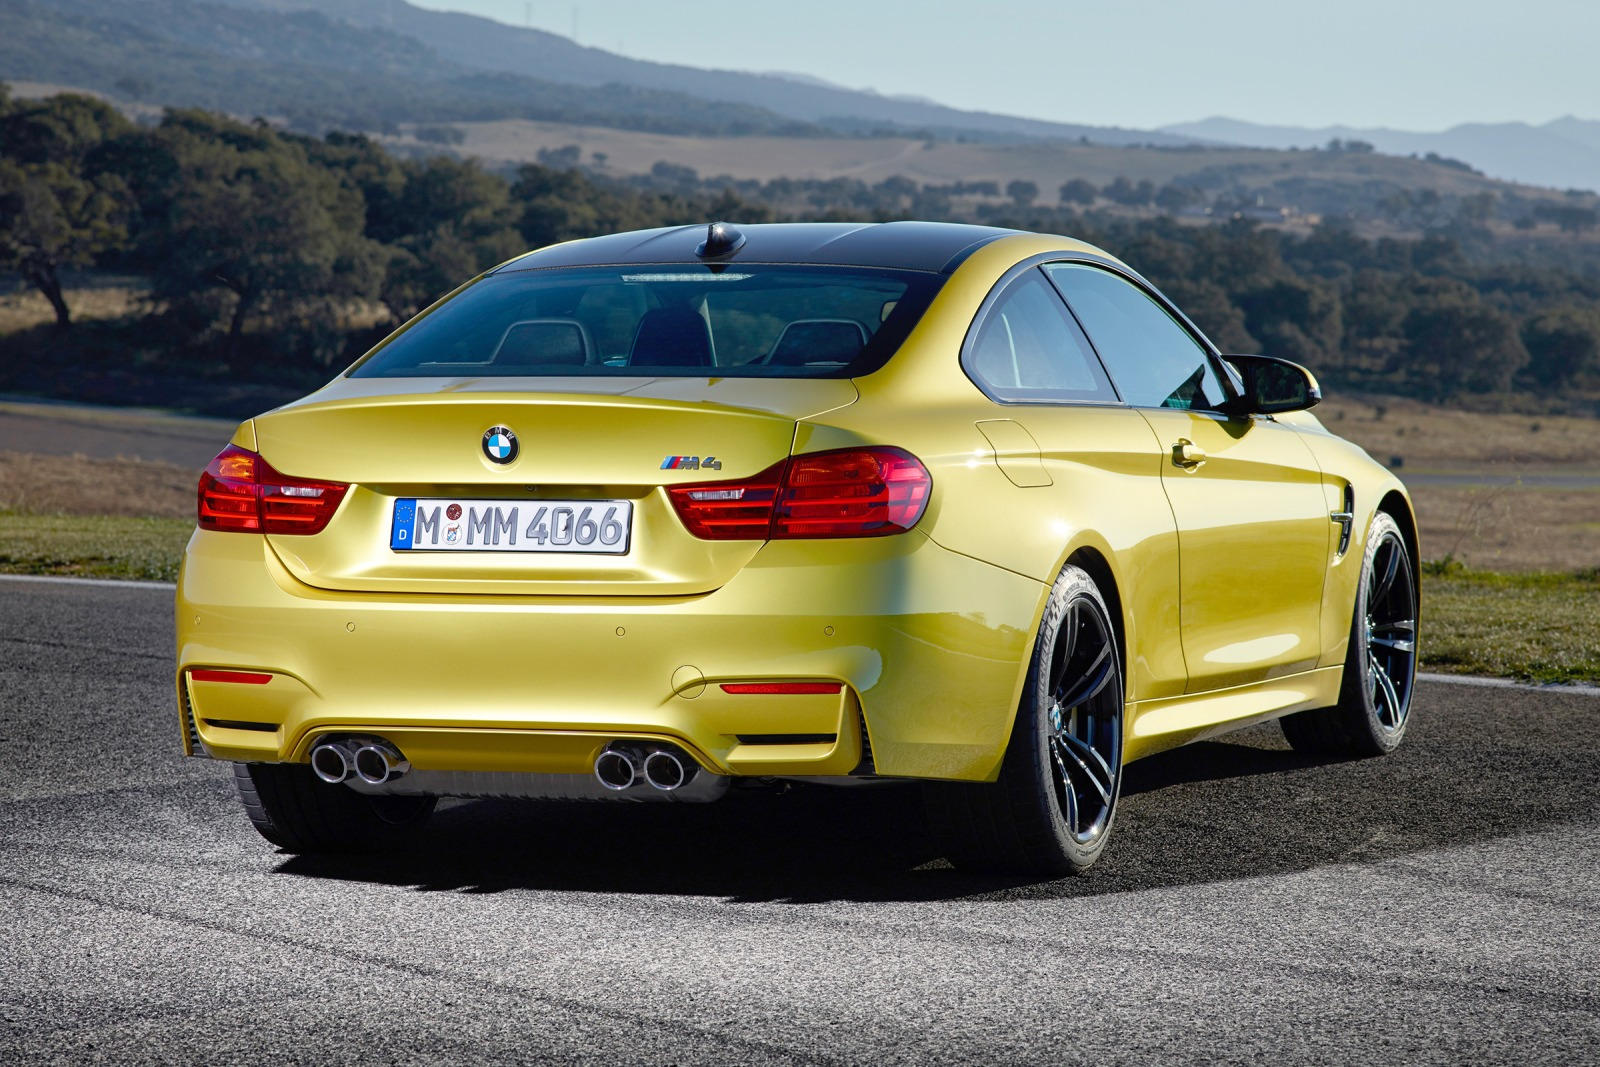 2017 BMW M4 Coupe: Review, Trims, Specs, Price, New Interior Features